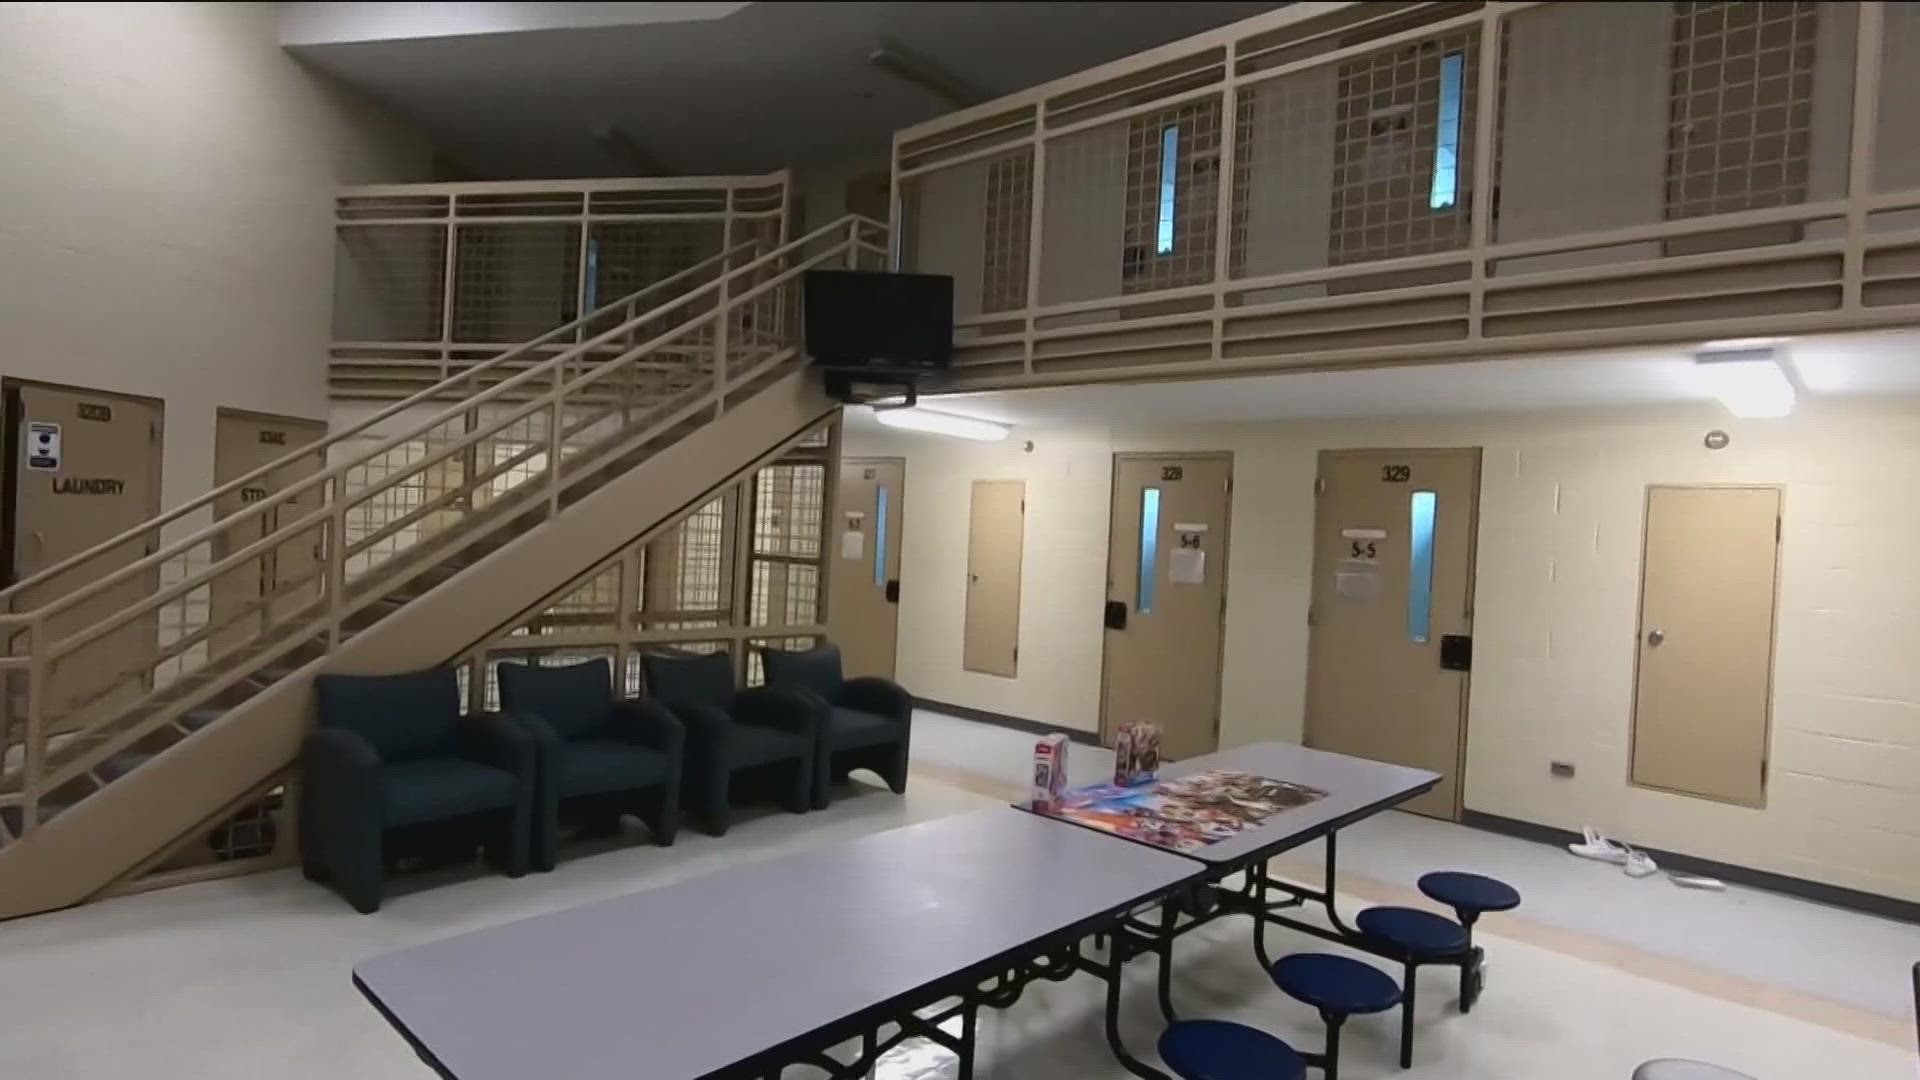 In a few months, low-risk kids will go to "the bridge" instead of going to jail; it is the new Youth and Family Resource Center for Ada County.